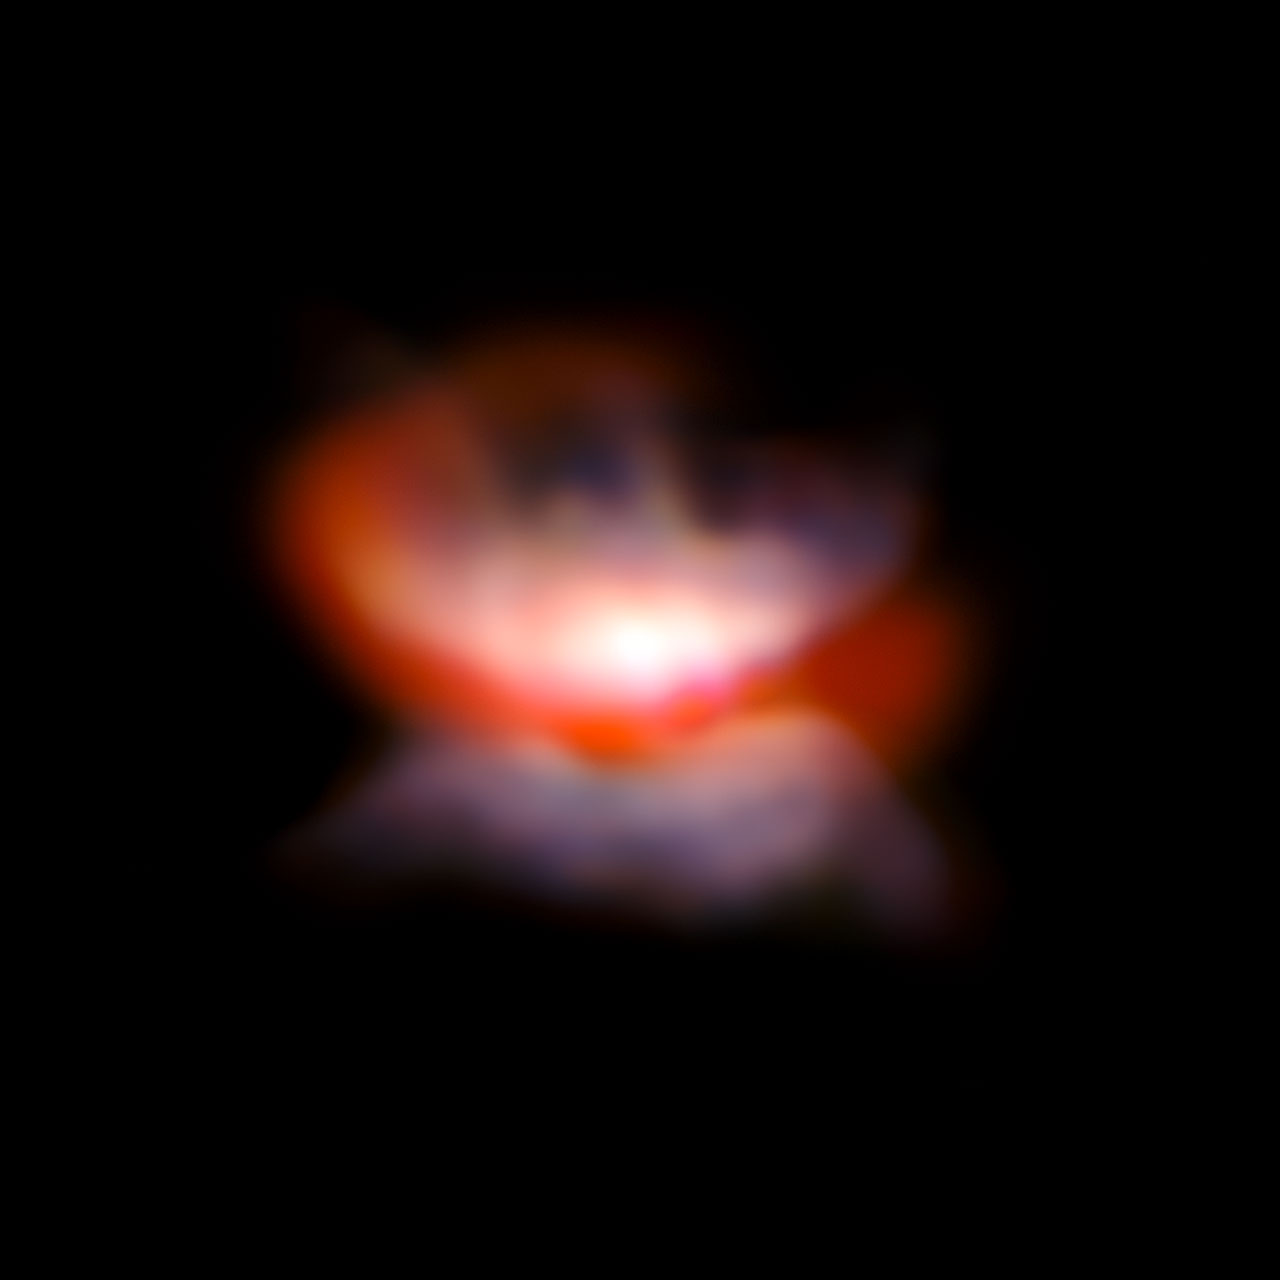 VLT/SPHERE and NACO image of the star L2 Puppis and its surround